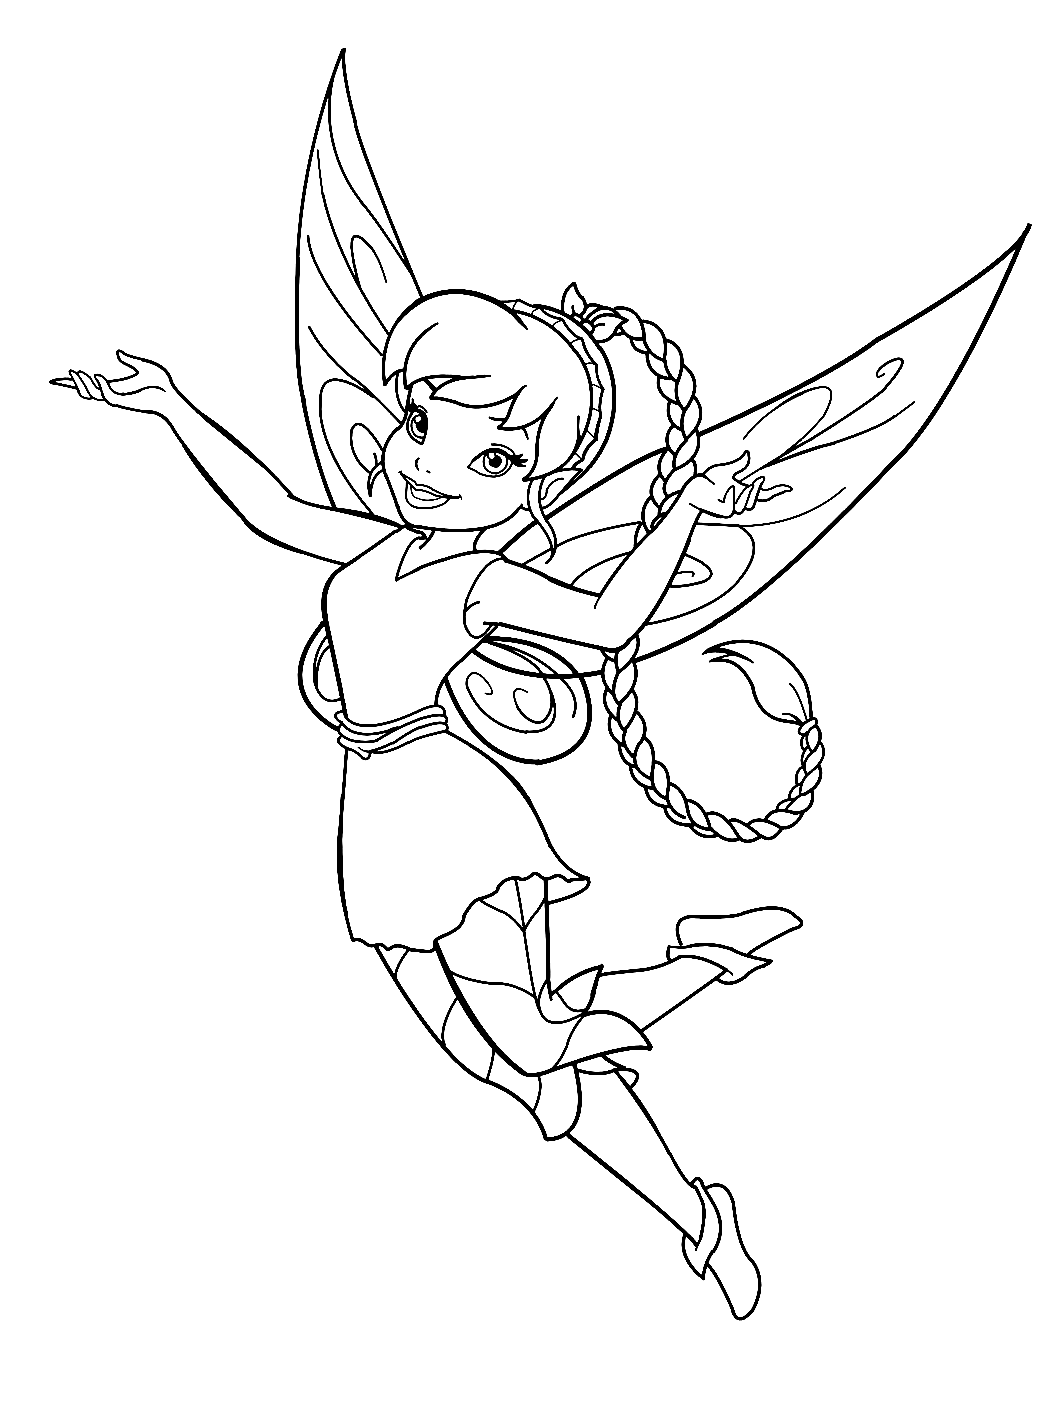 Cute & Beautiful Fairy Coloring Pages (Updated) PDF